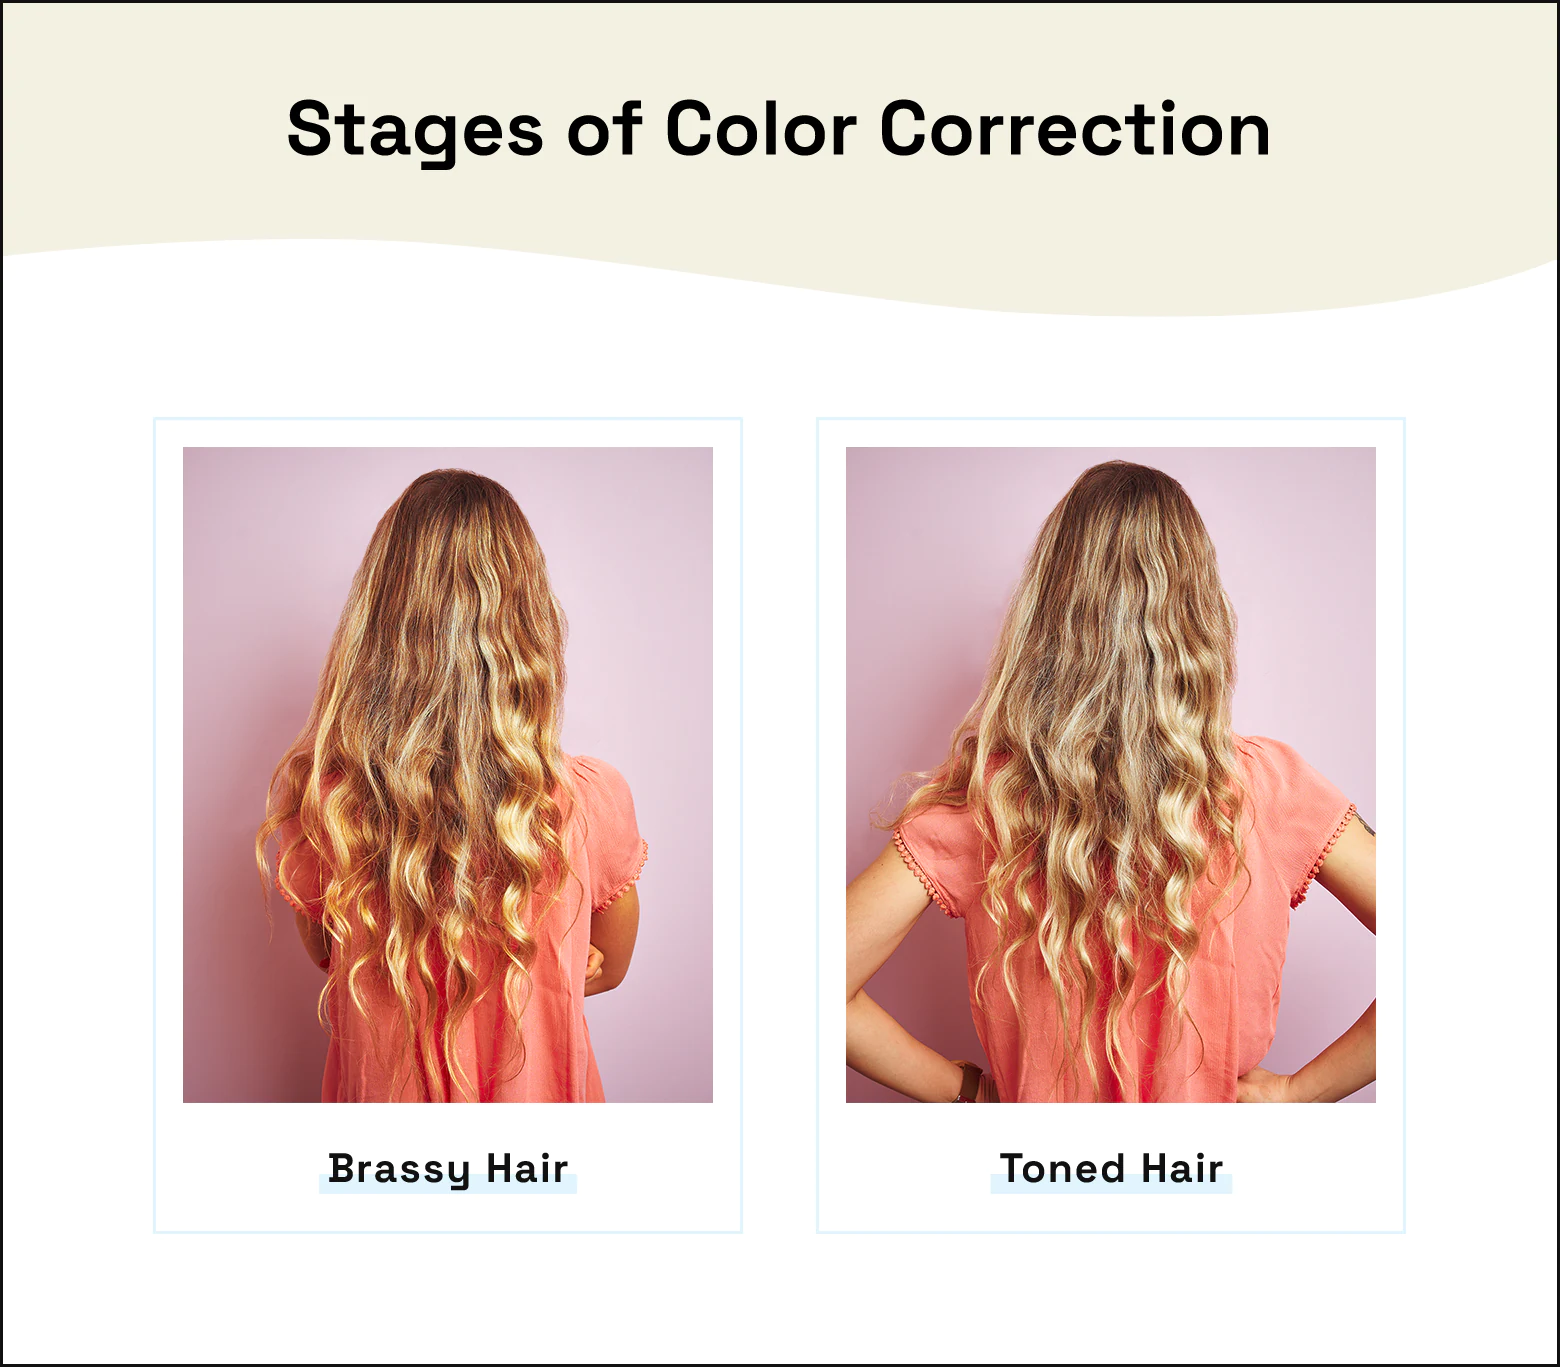 Two stages of color correction on blonde hair.